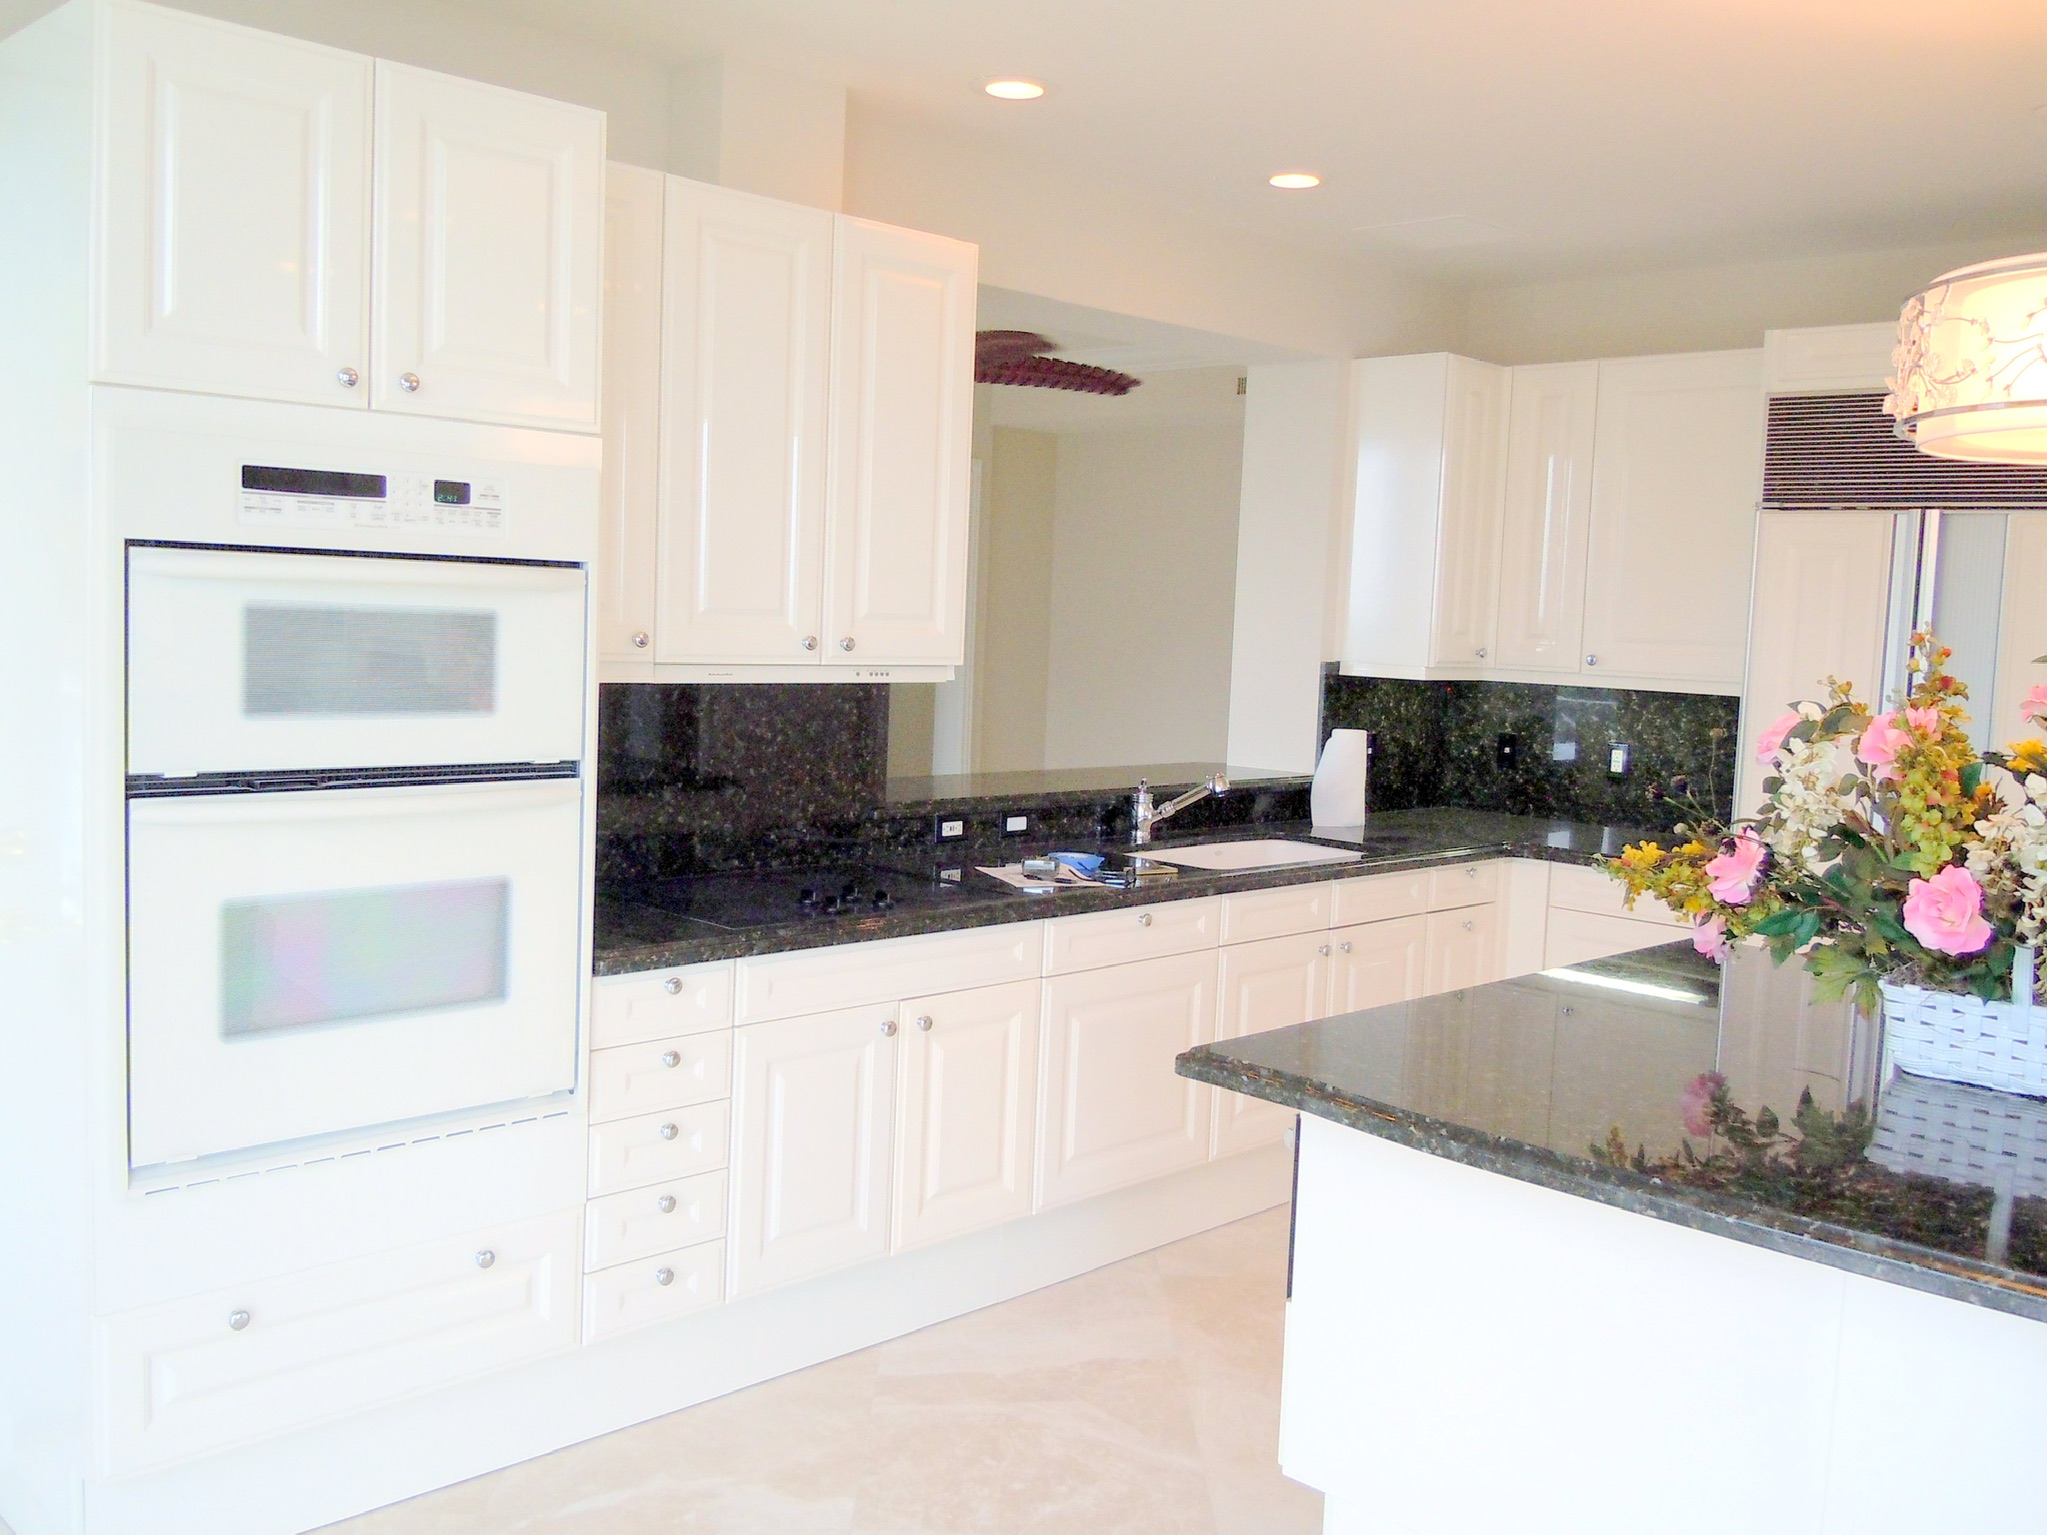 This is the before photo of a kitchen that was transformed by William Charles.